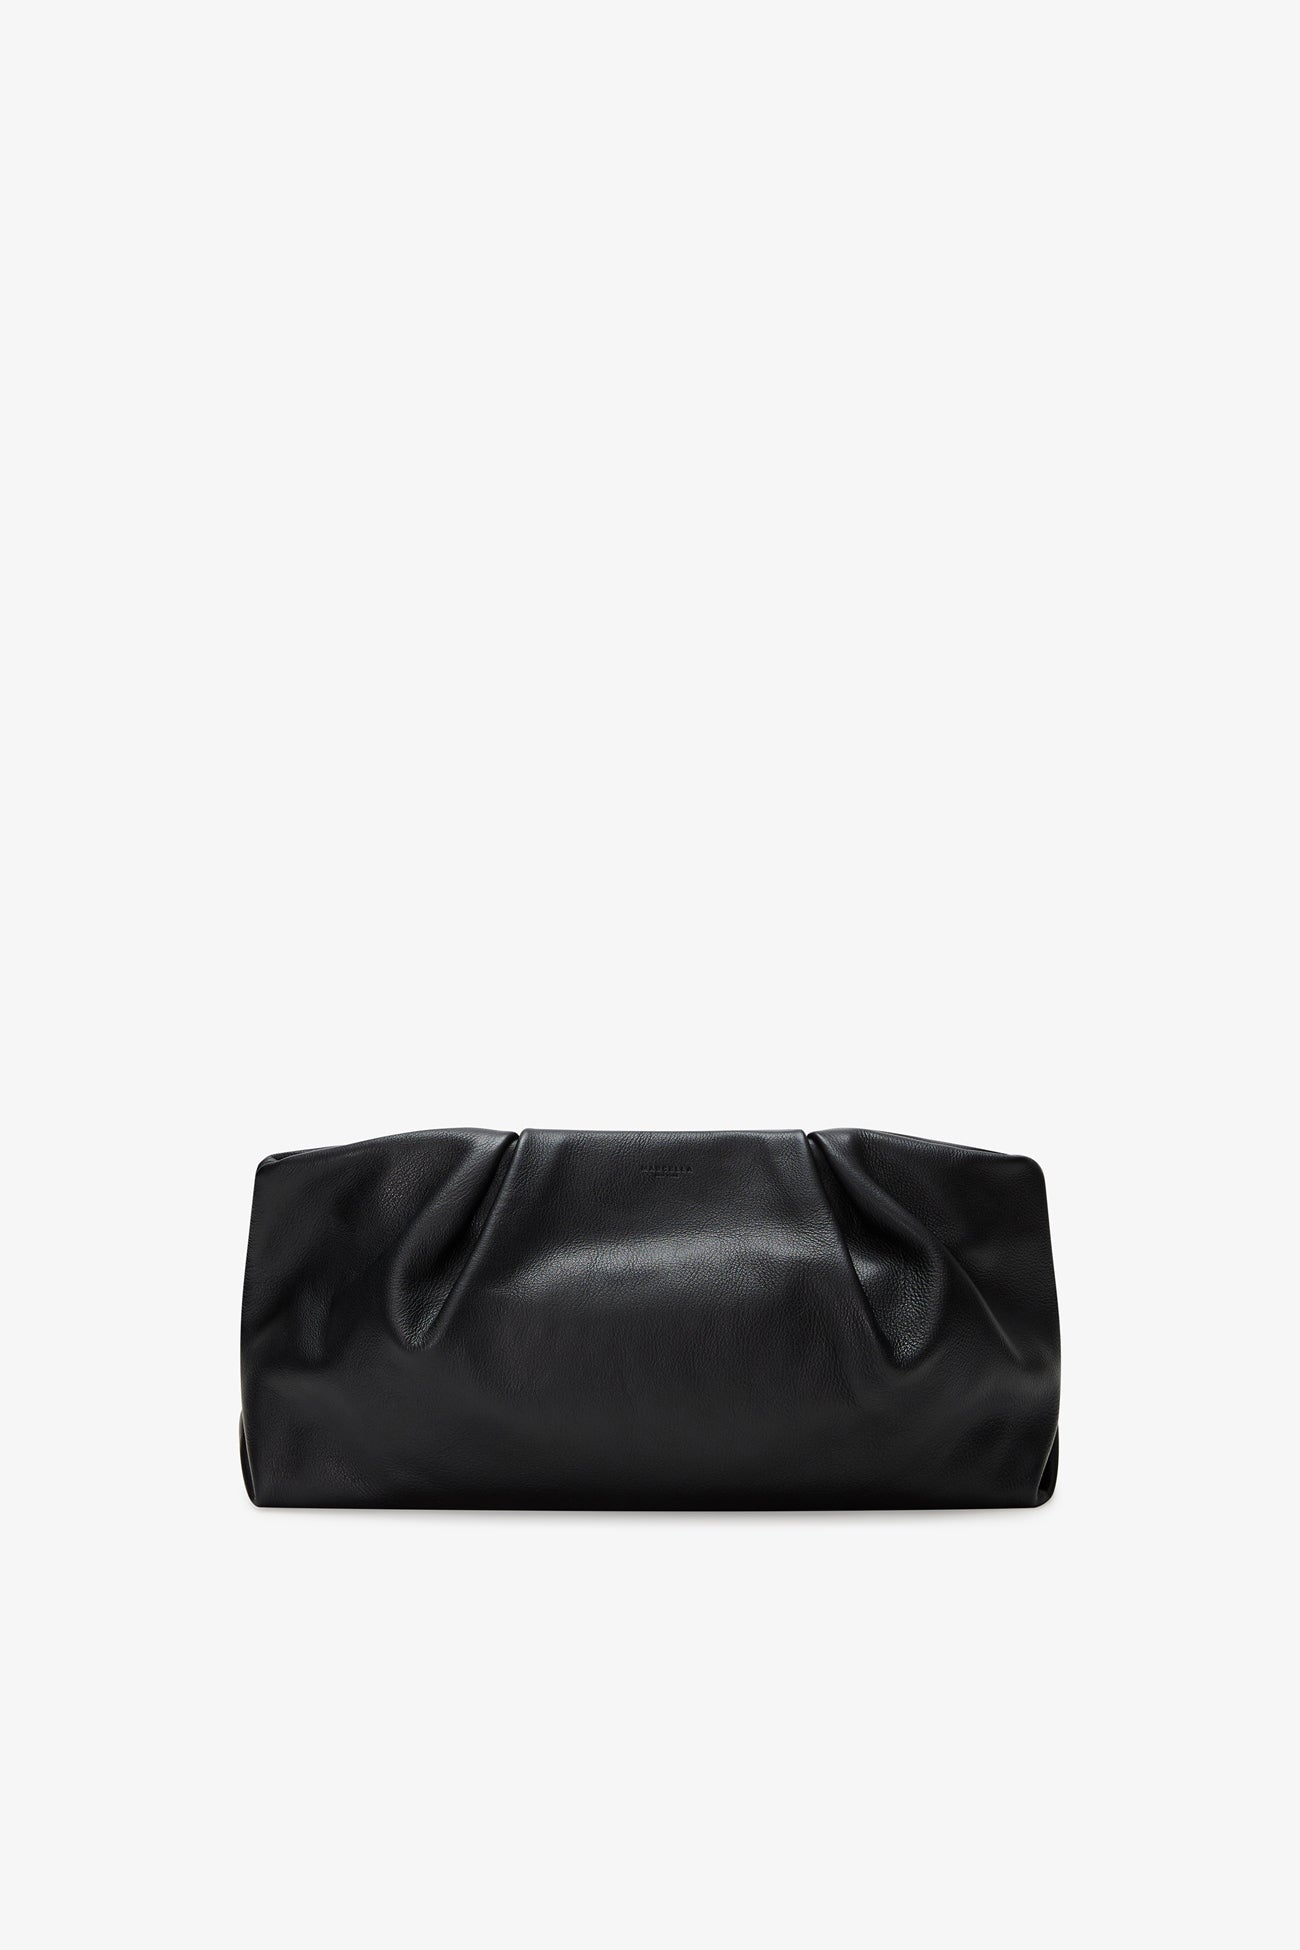 Black Leather Cocktail Bag - Rory Clutch | Marcella